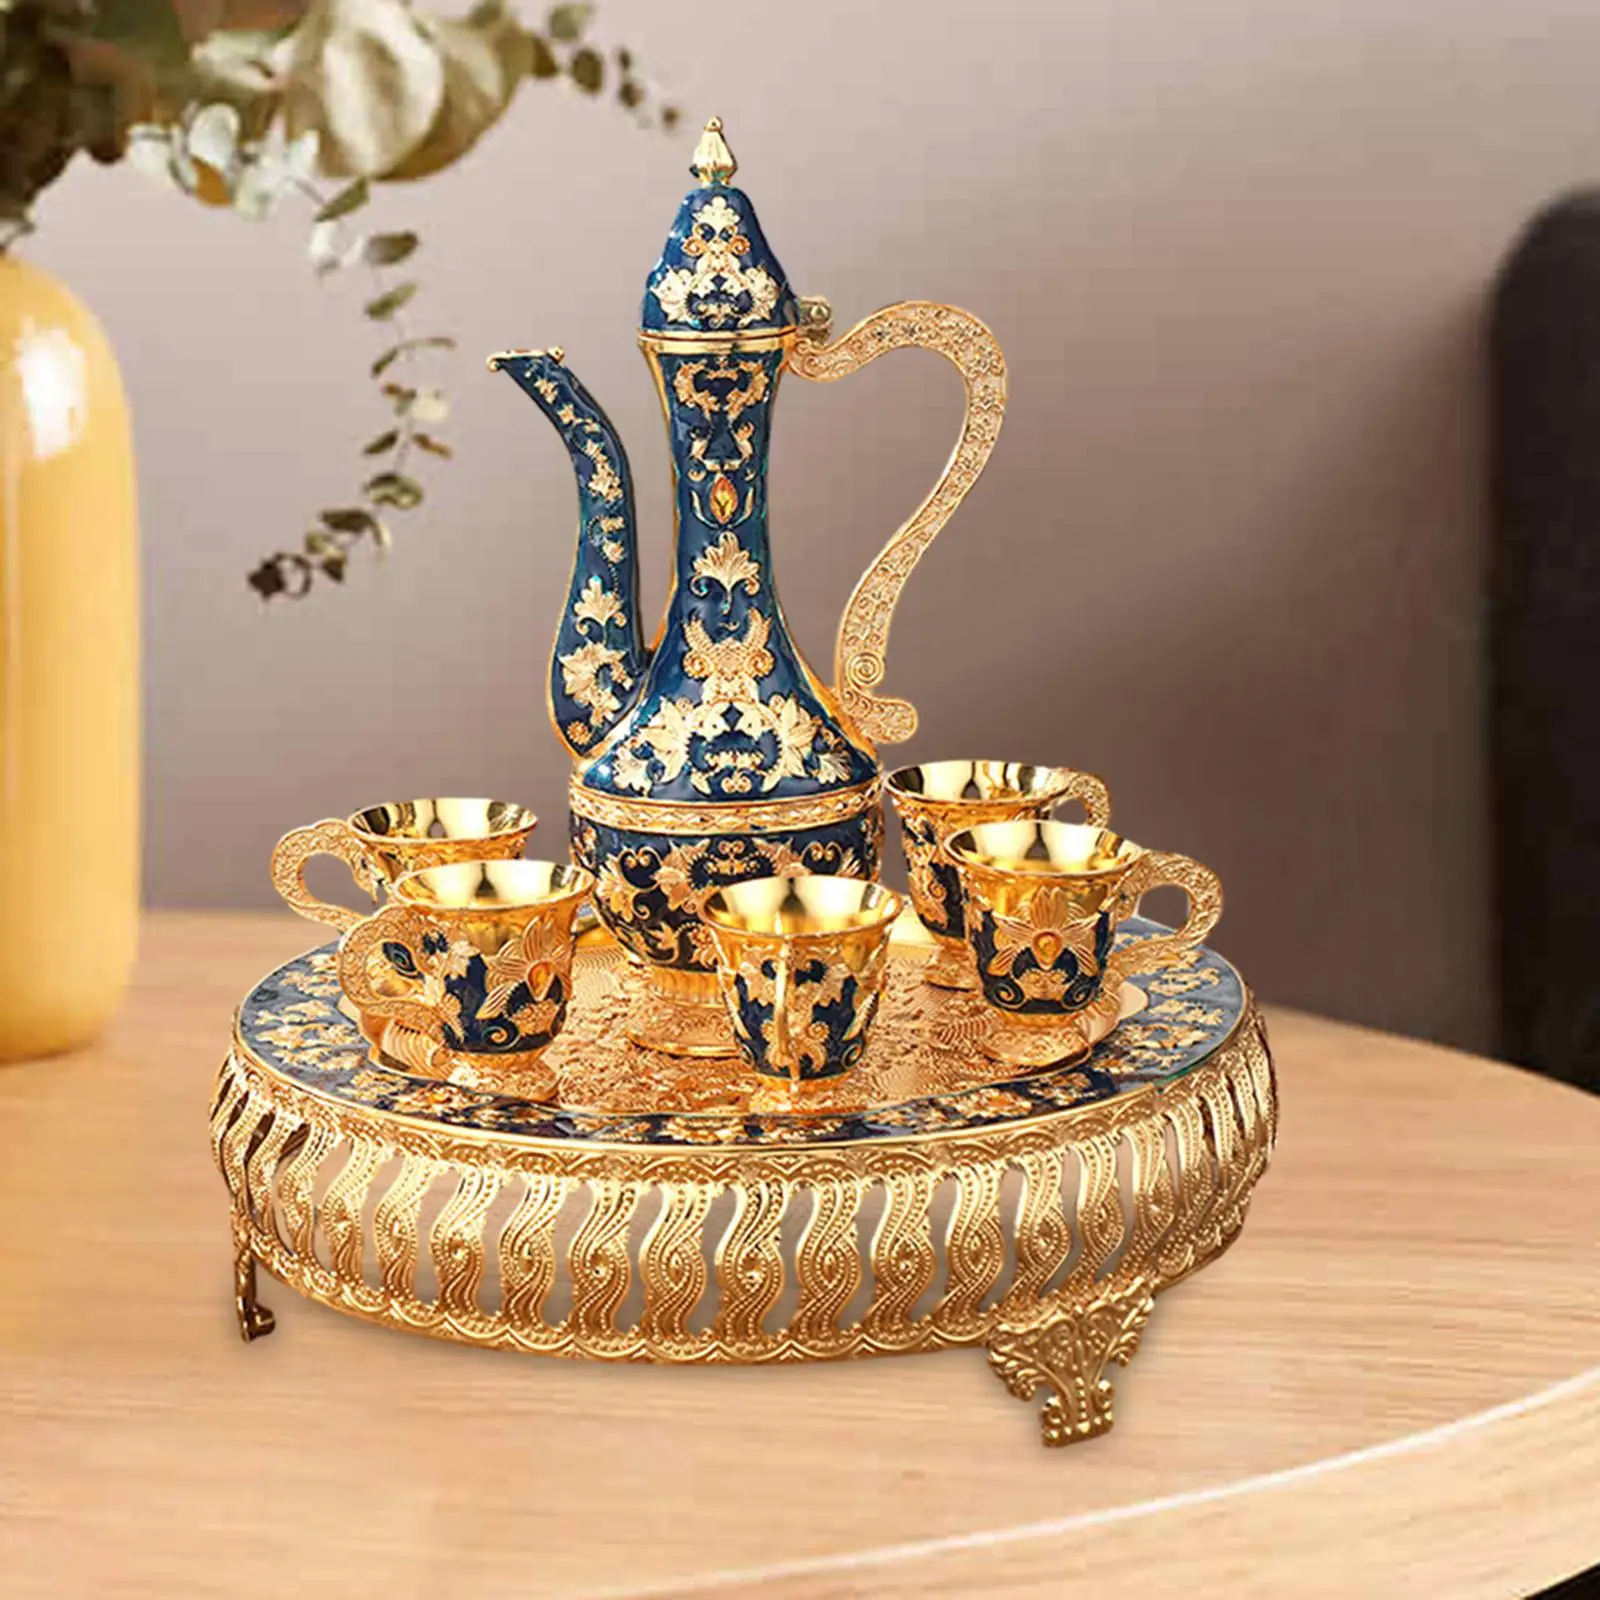 Turkish Coffee Pot Set Vintage Style with Drinking Cups Serving Set for Living Room Party Home Dining Table Decoration